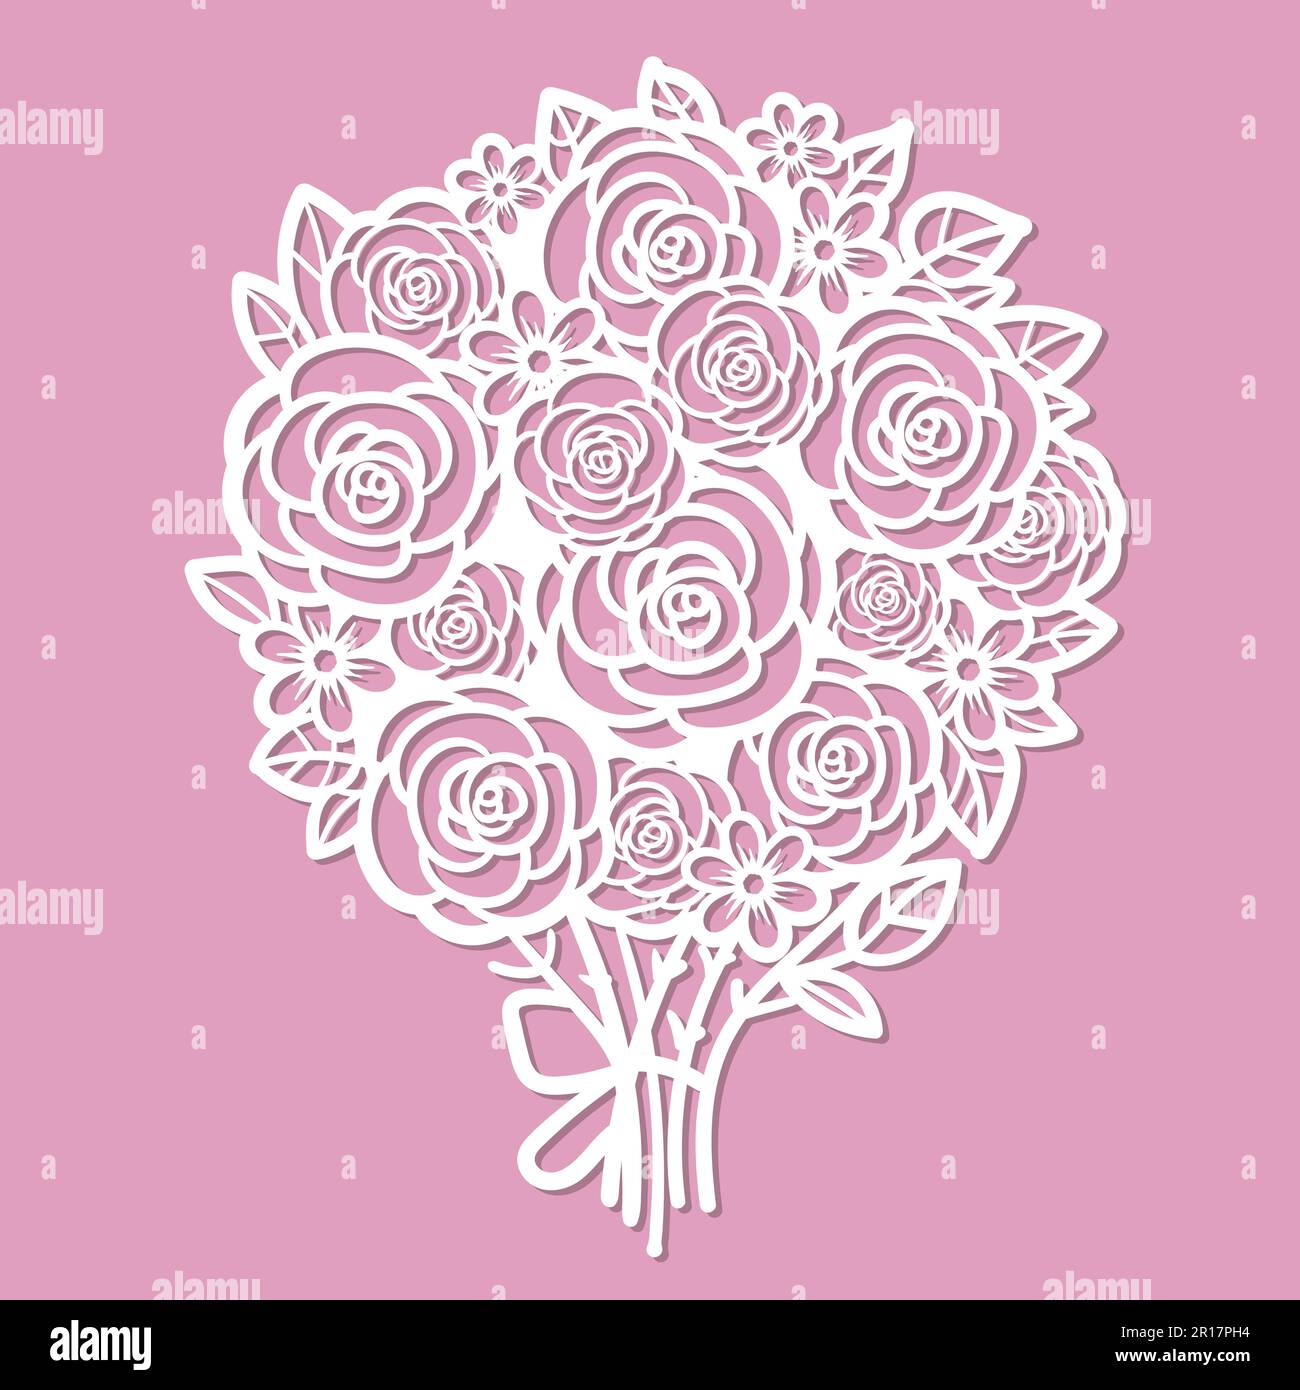 Bouquet of roses. Template for laser cutting of paper, cardboard, metal, wood. For the design of cards, stickers, interior decorations, scrapbooking, Stock Vector